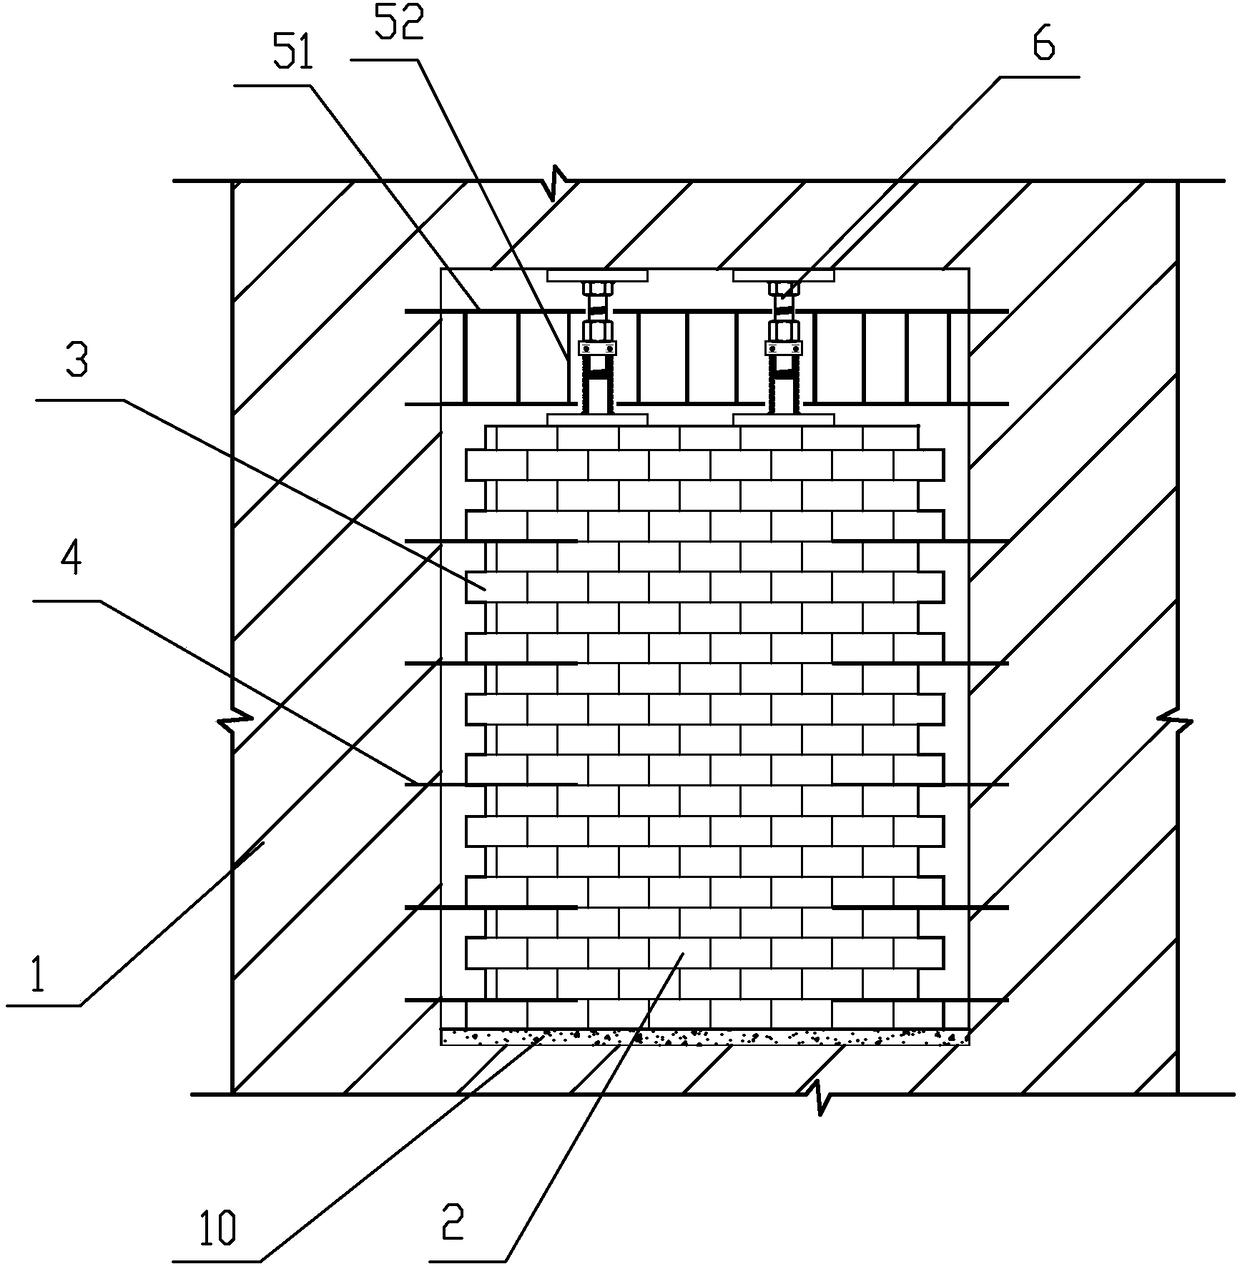 Brickwork structure wall-breaking and hole-forming pre-jacking recovery construction method